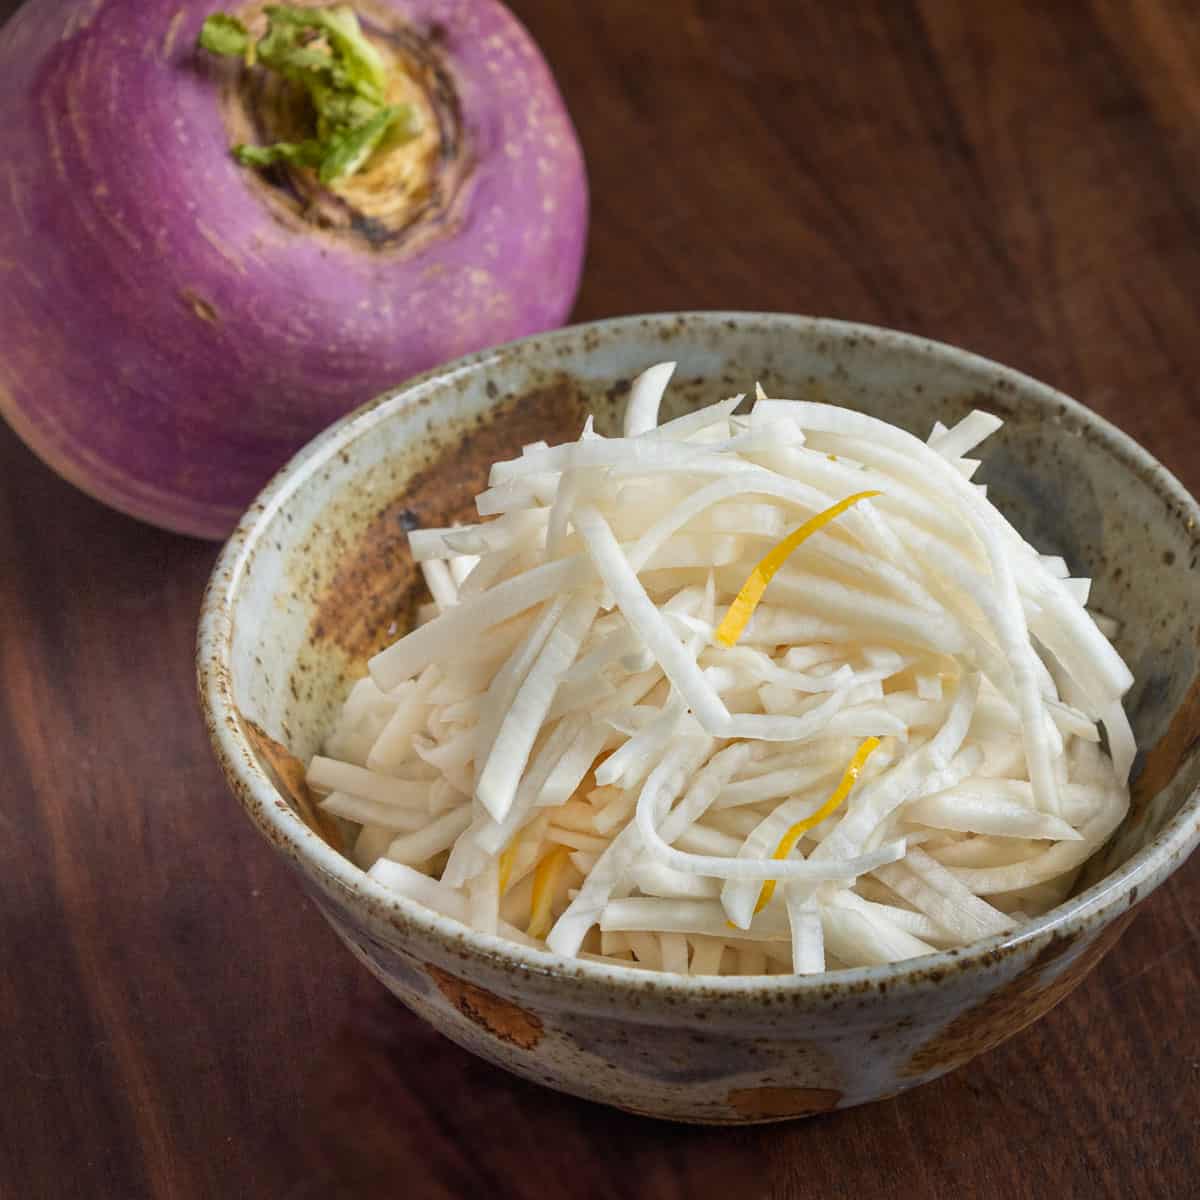 a bowl of shredded fermented turnips next to purple top turnips